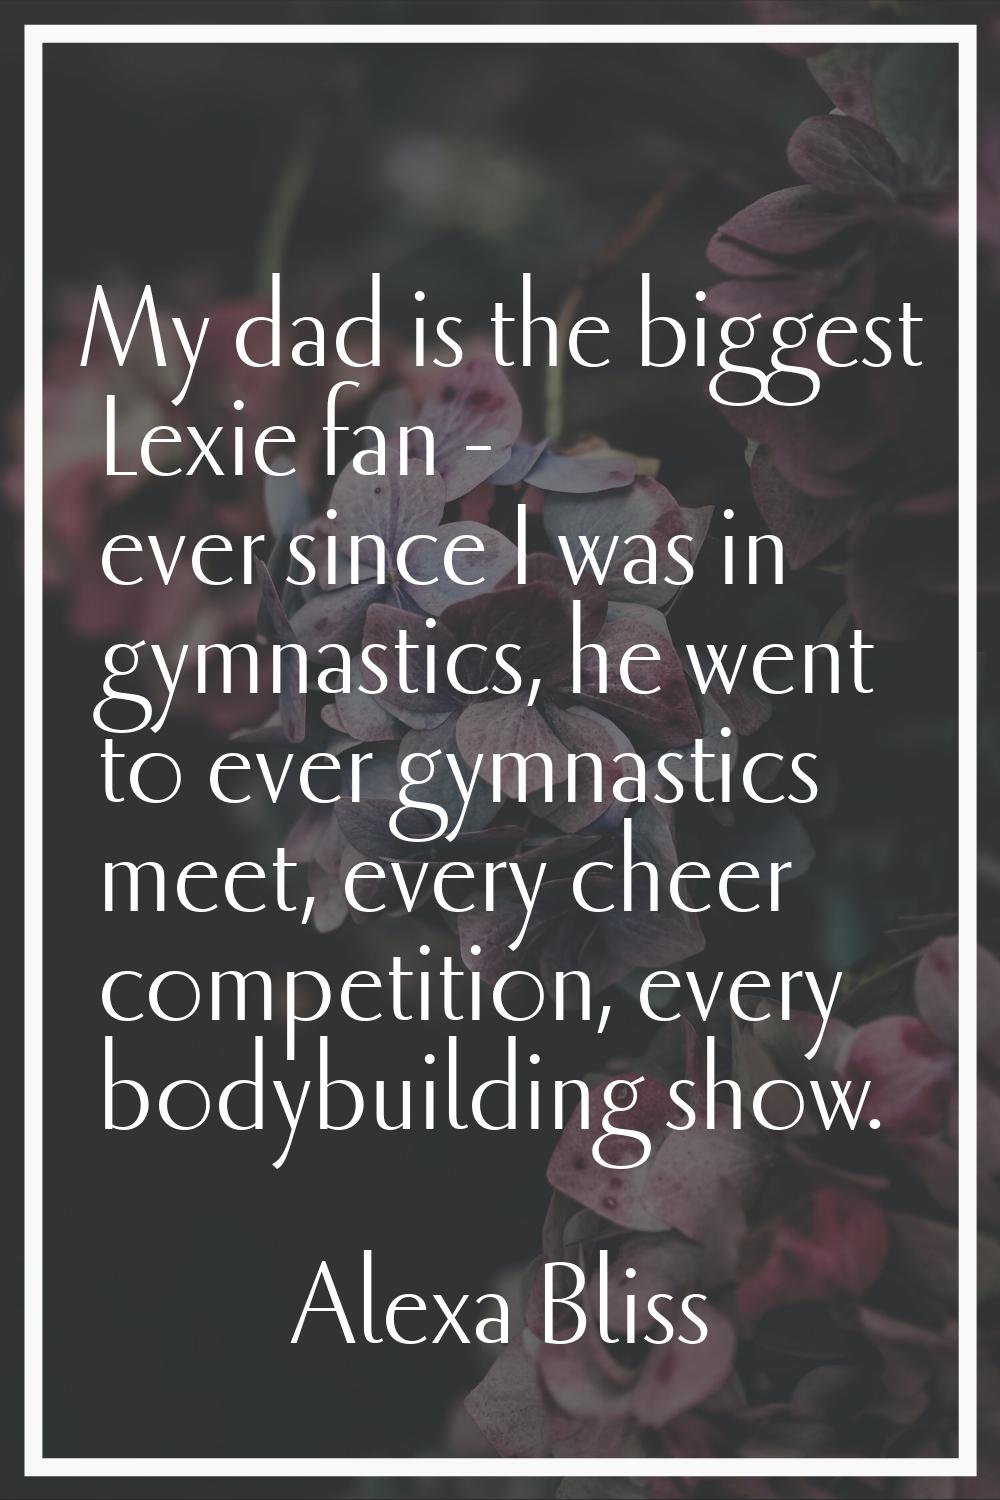 My dad is the biggest Lexie fan - ever since I was in gymnastics, he went to ever gymnastics meet, 